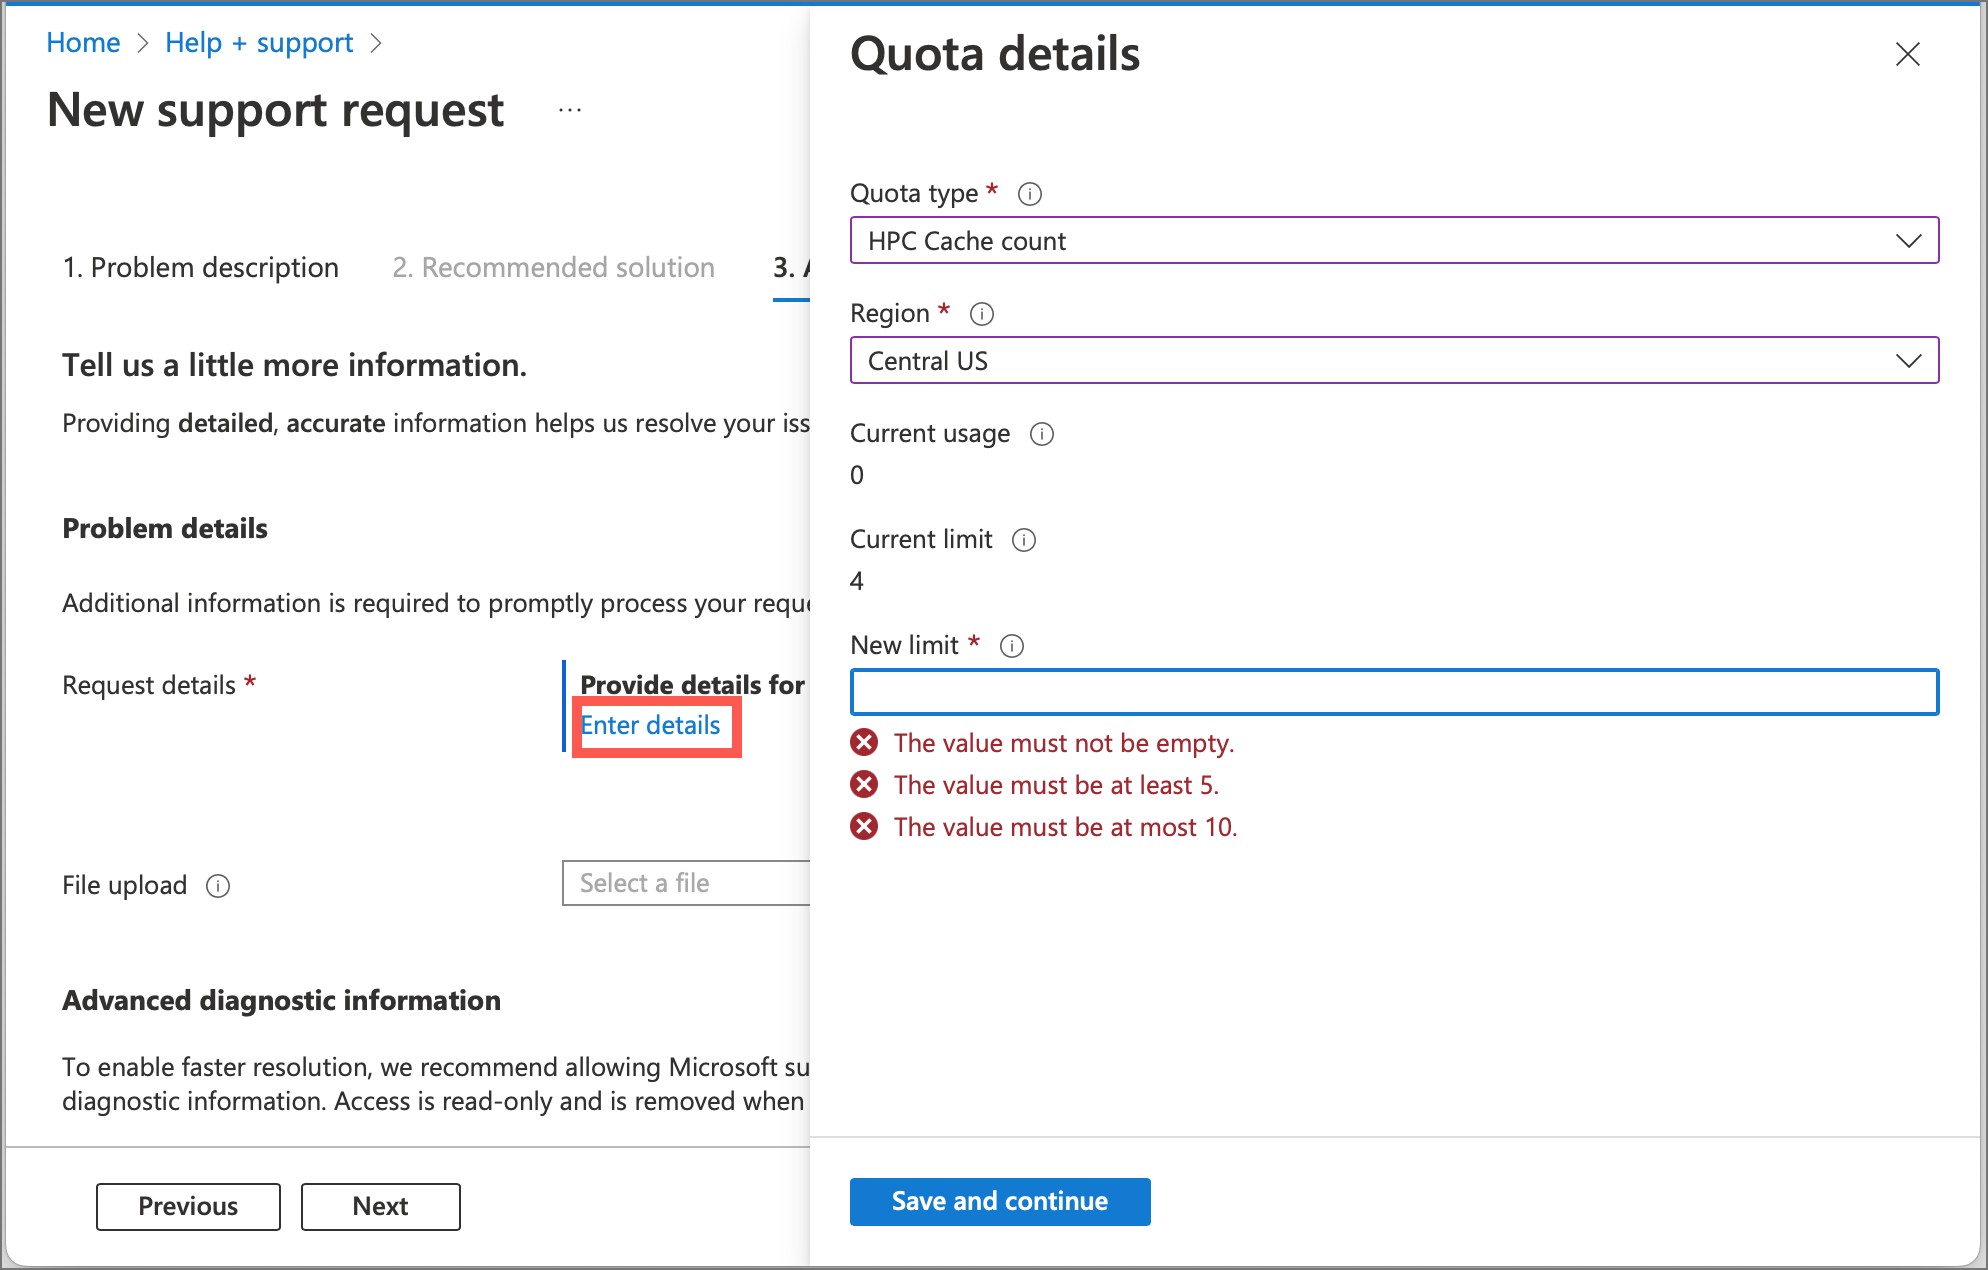 Screenshot of Azure portal details form for HPC Cache, with options to select region and new limit.